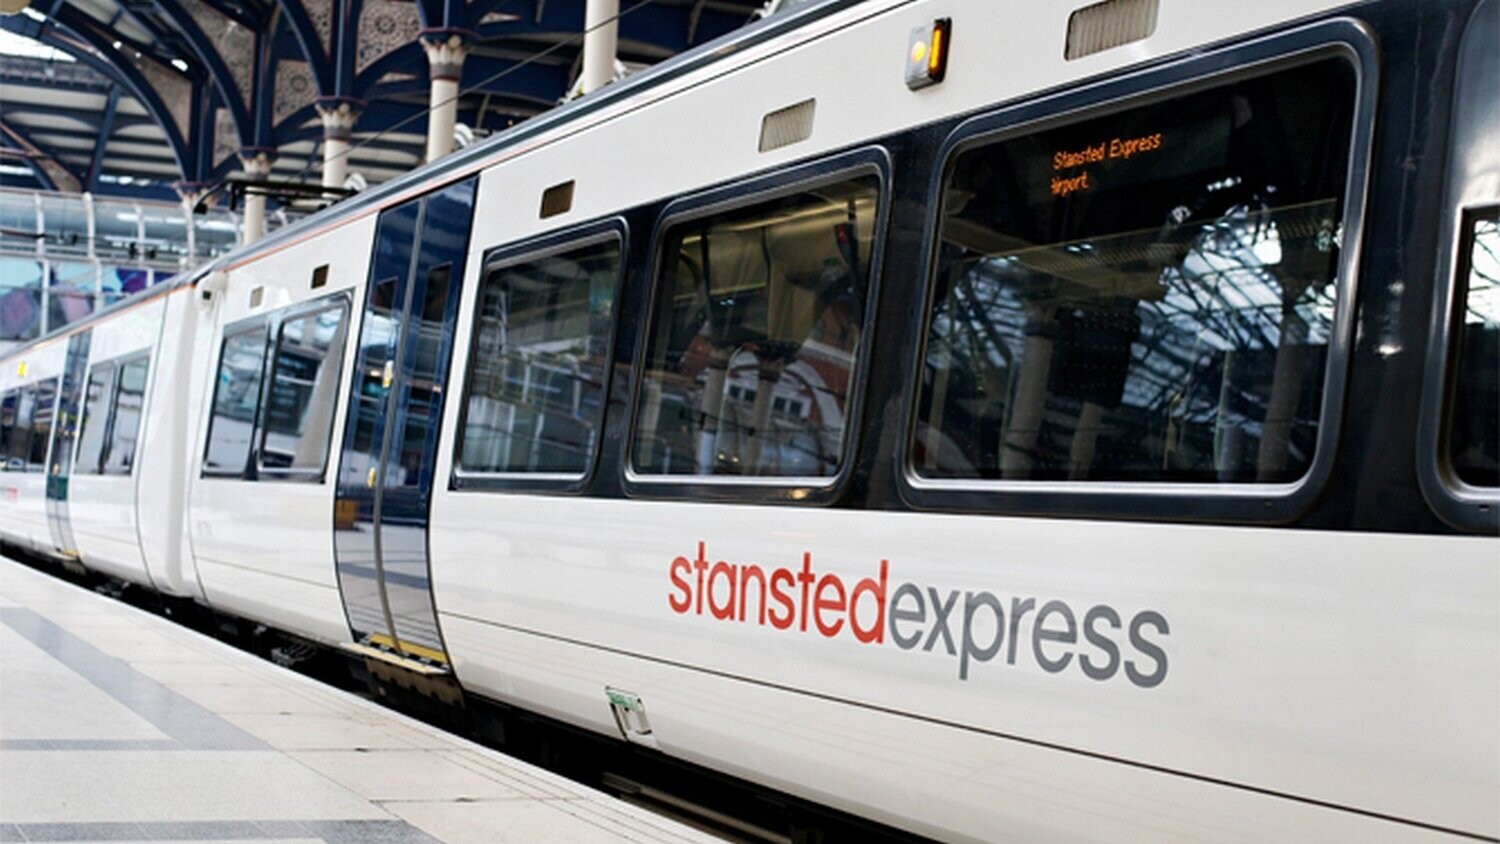 Stansted Express, A/R, Bambini 5-15 anni